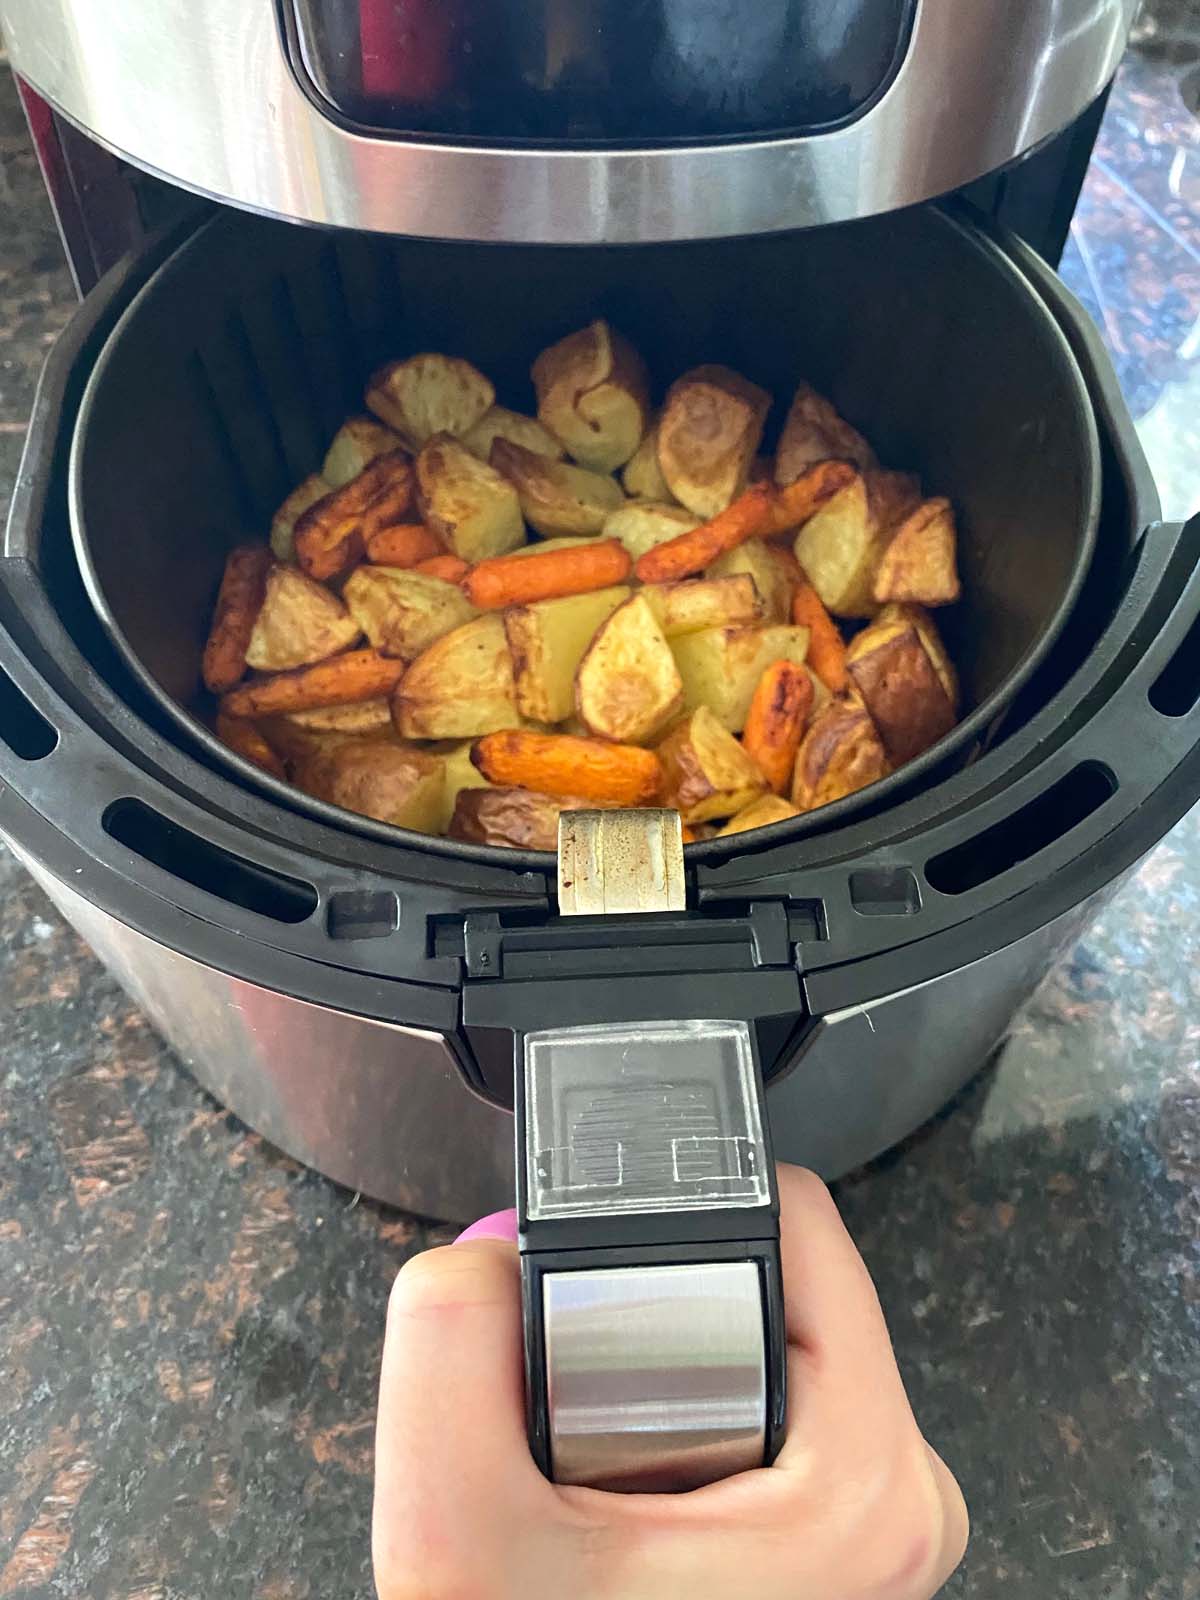 Roasted potatoes and carrots in an air fryer.